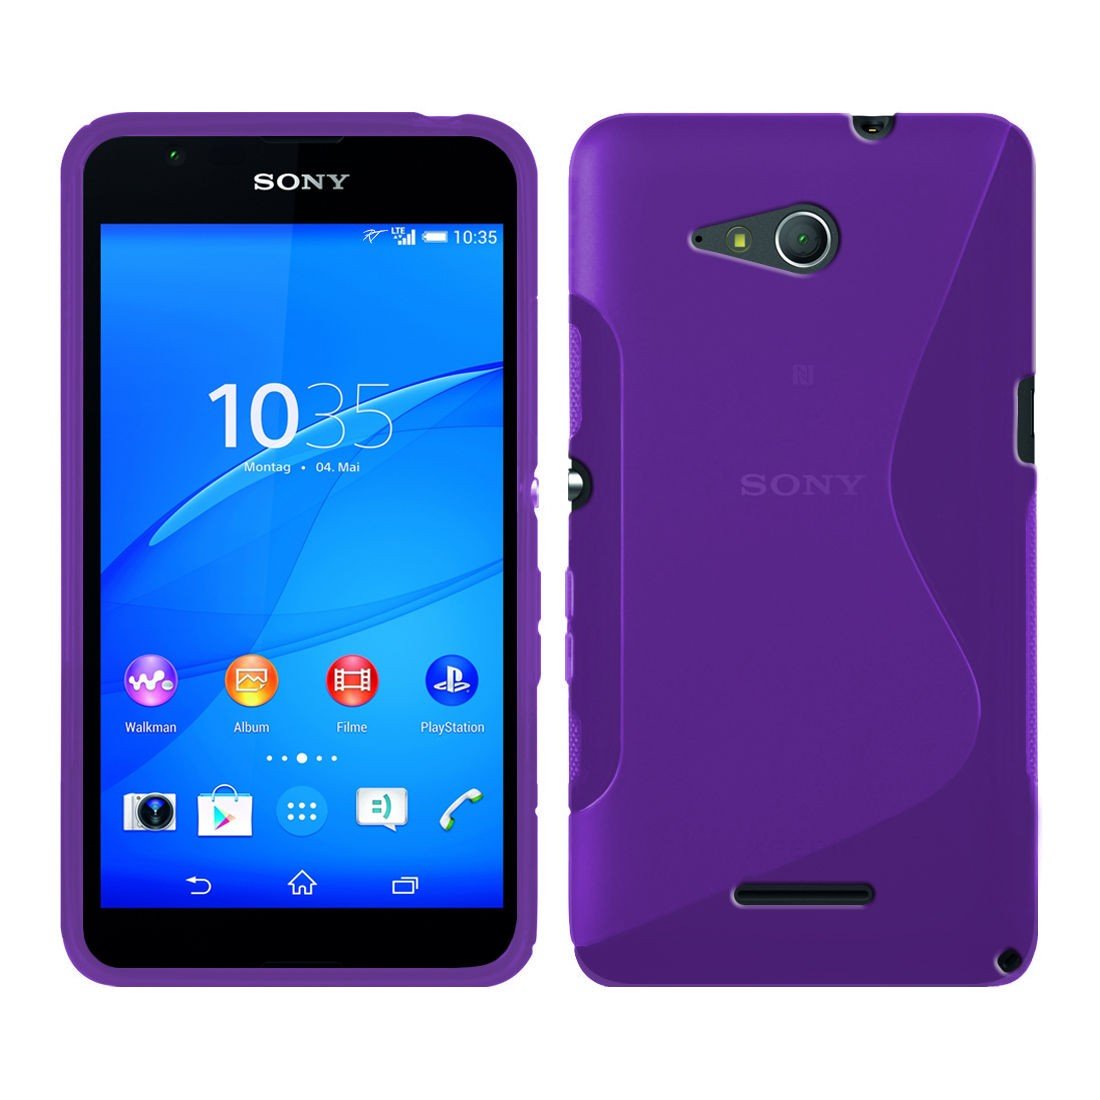 Hoesje Sony Xperia TPU case paars | MobileSupplies.nl